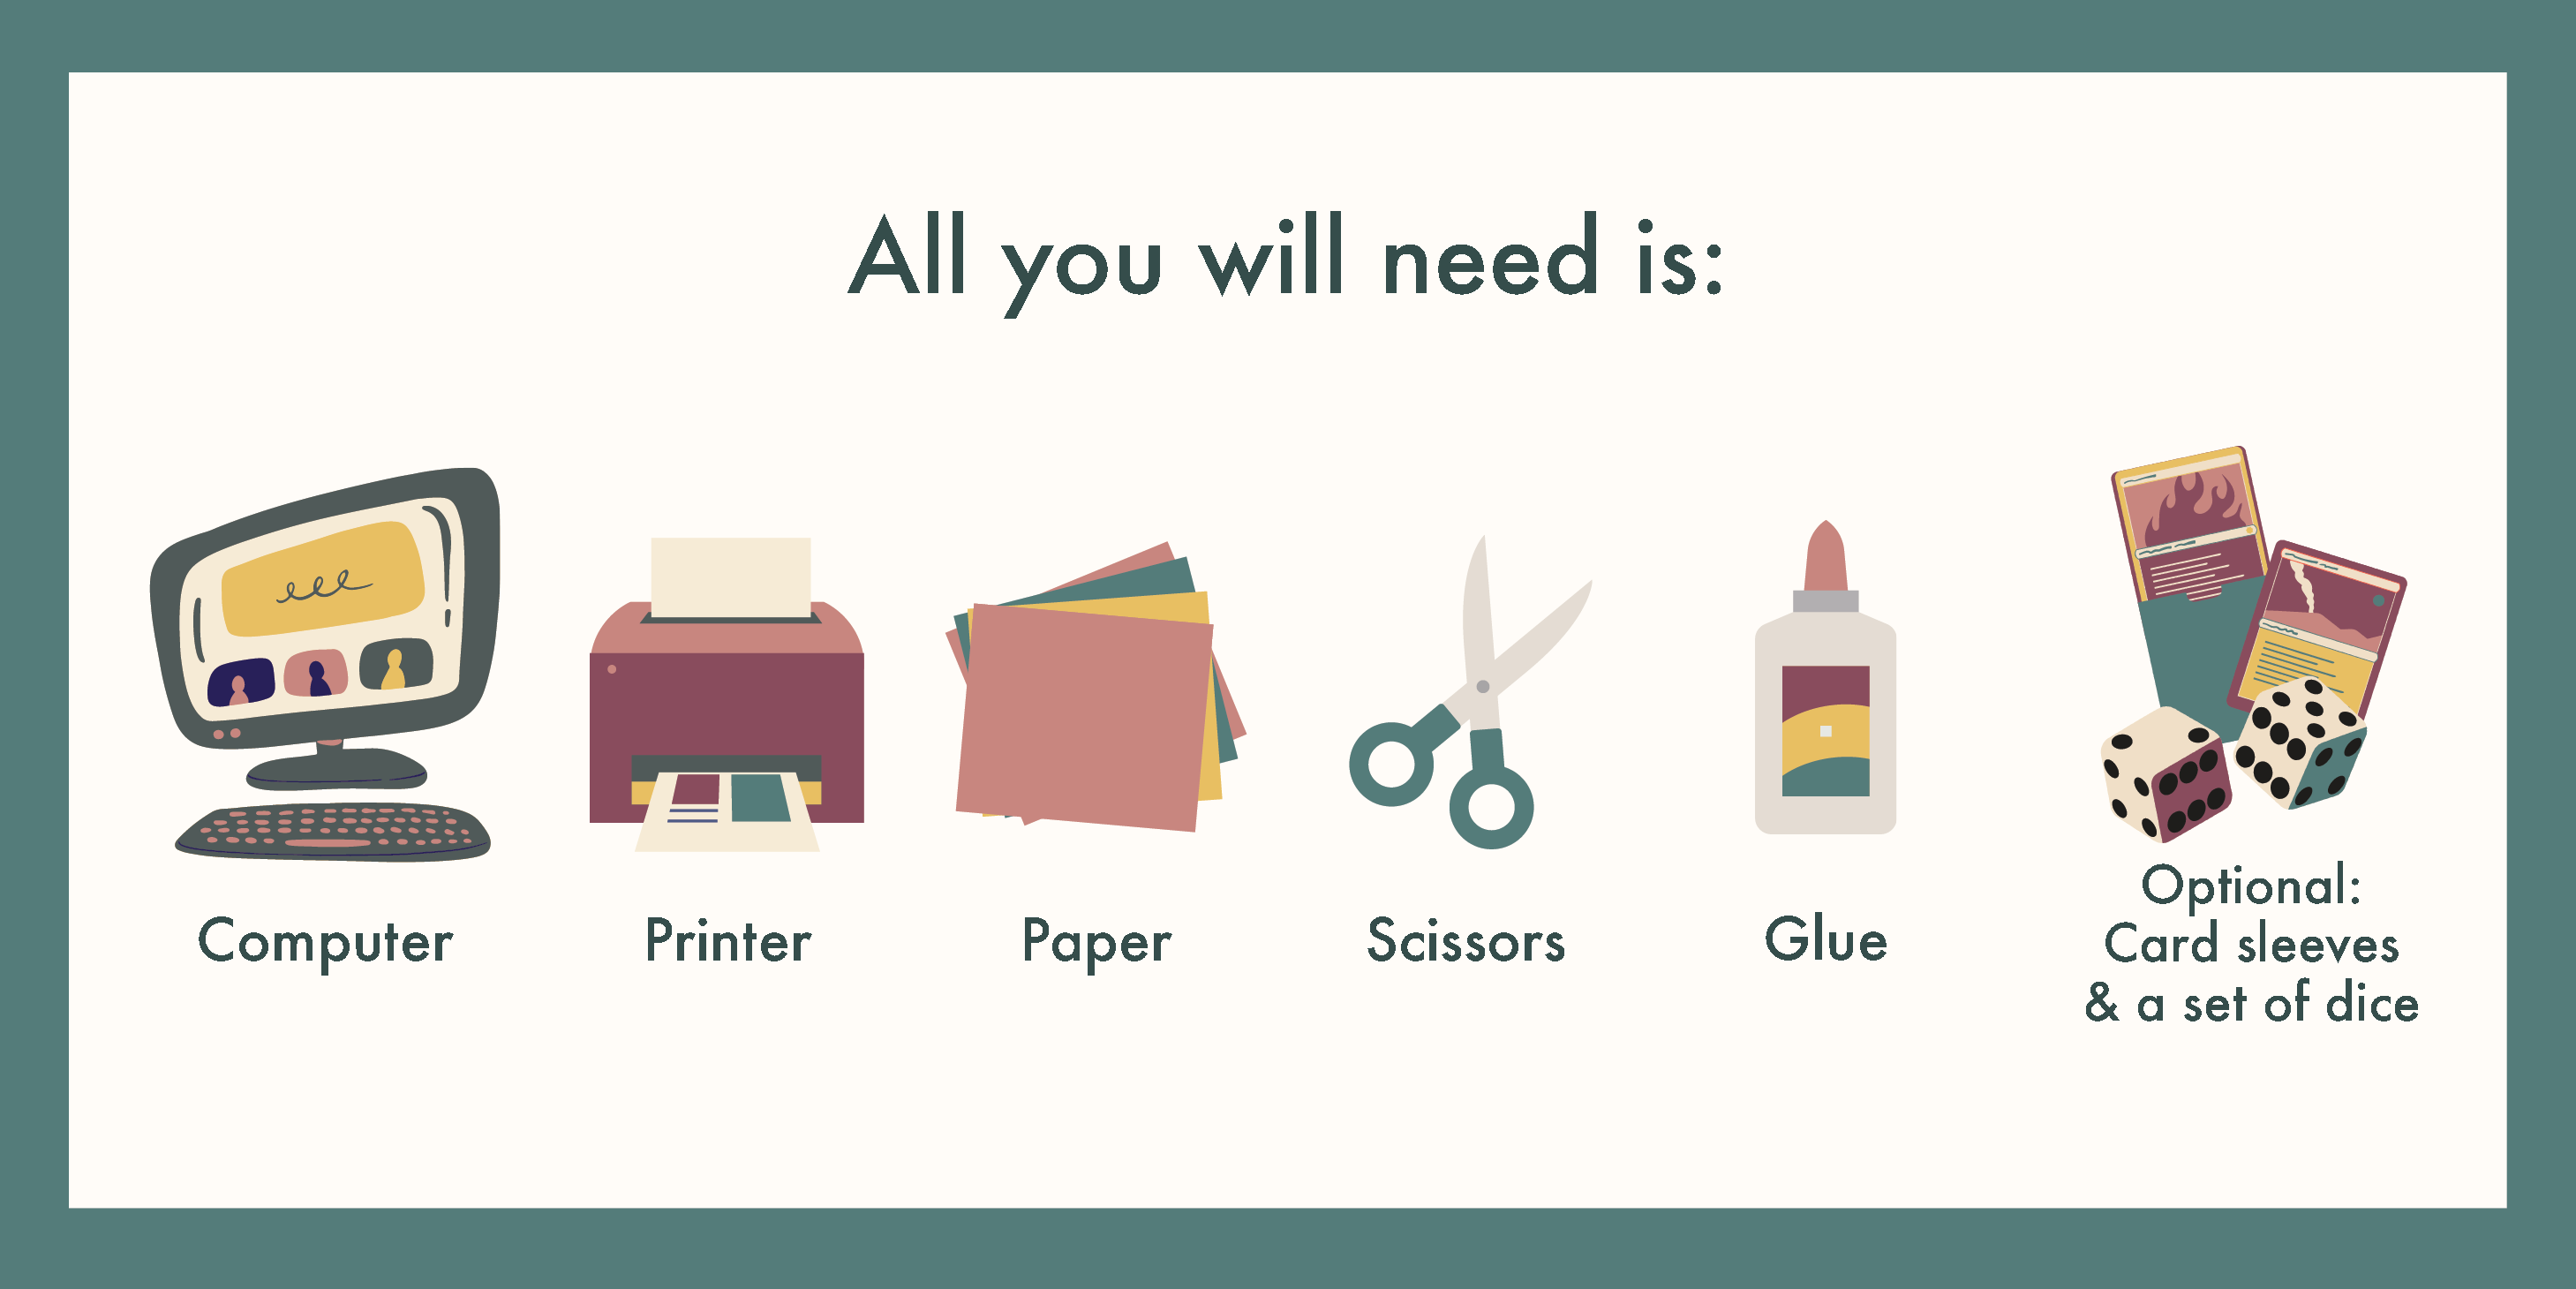 All you will need is: a computer and a printer, paper, scissors, glue, cardboard, [optional] Card sleeves and a set of dice (You can get these from a local boardgame store!)